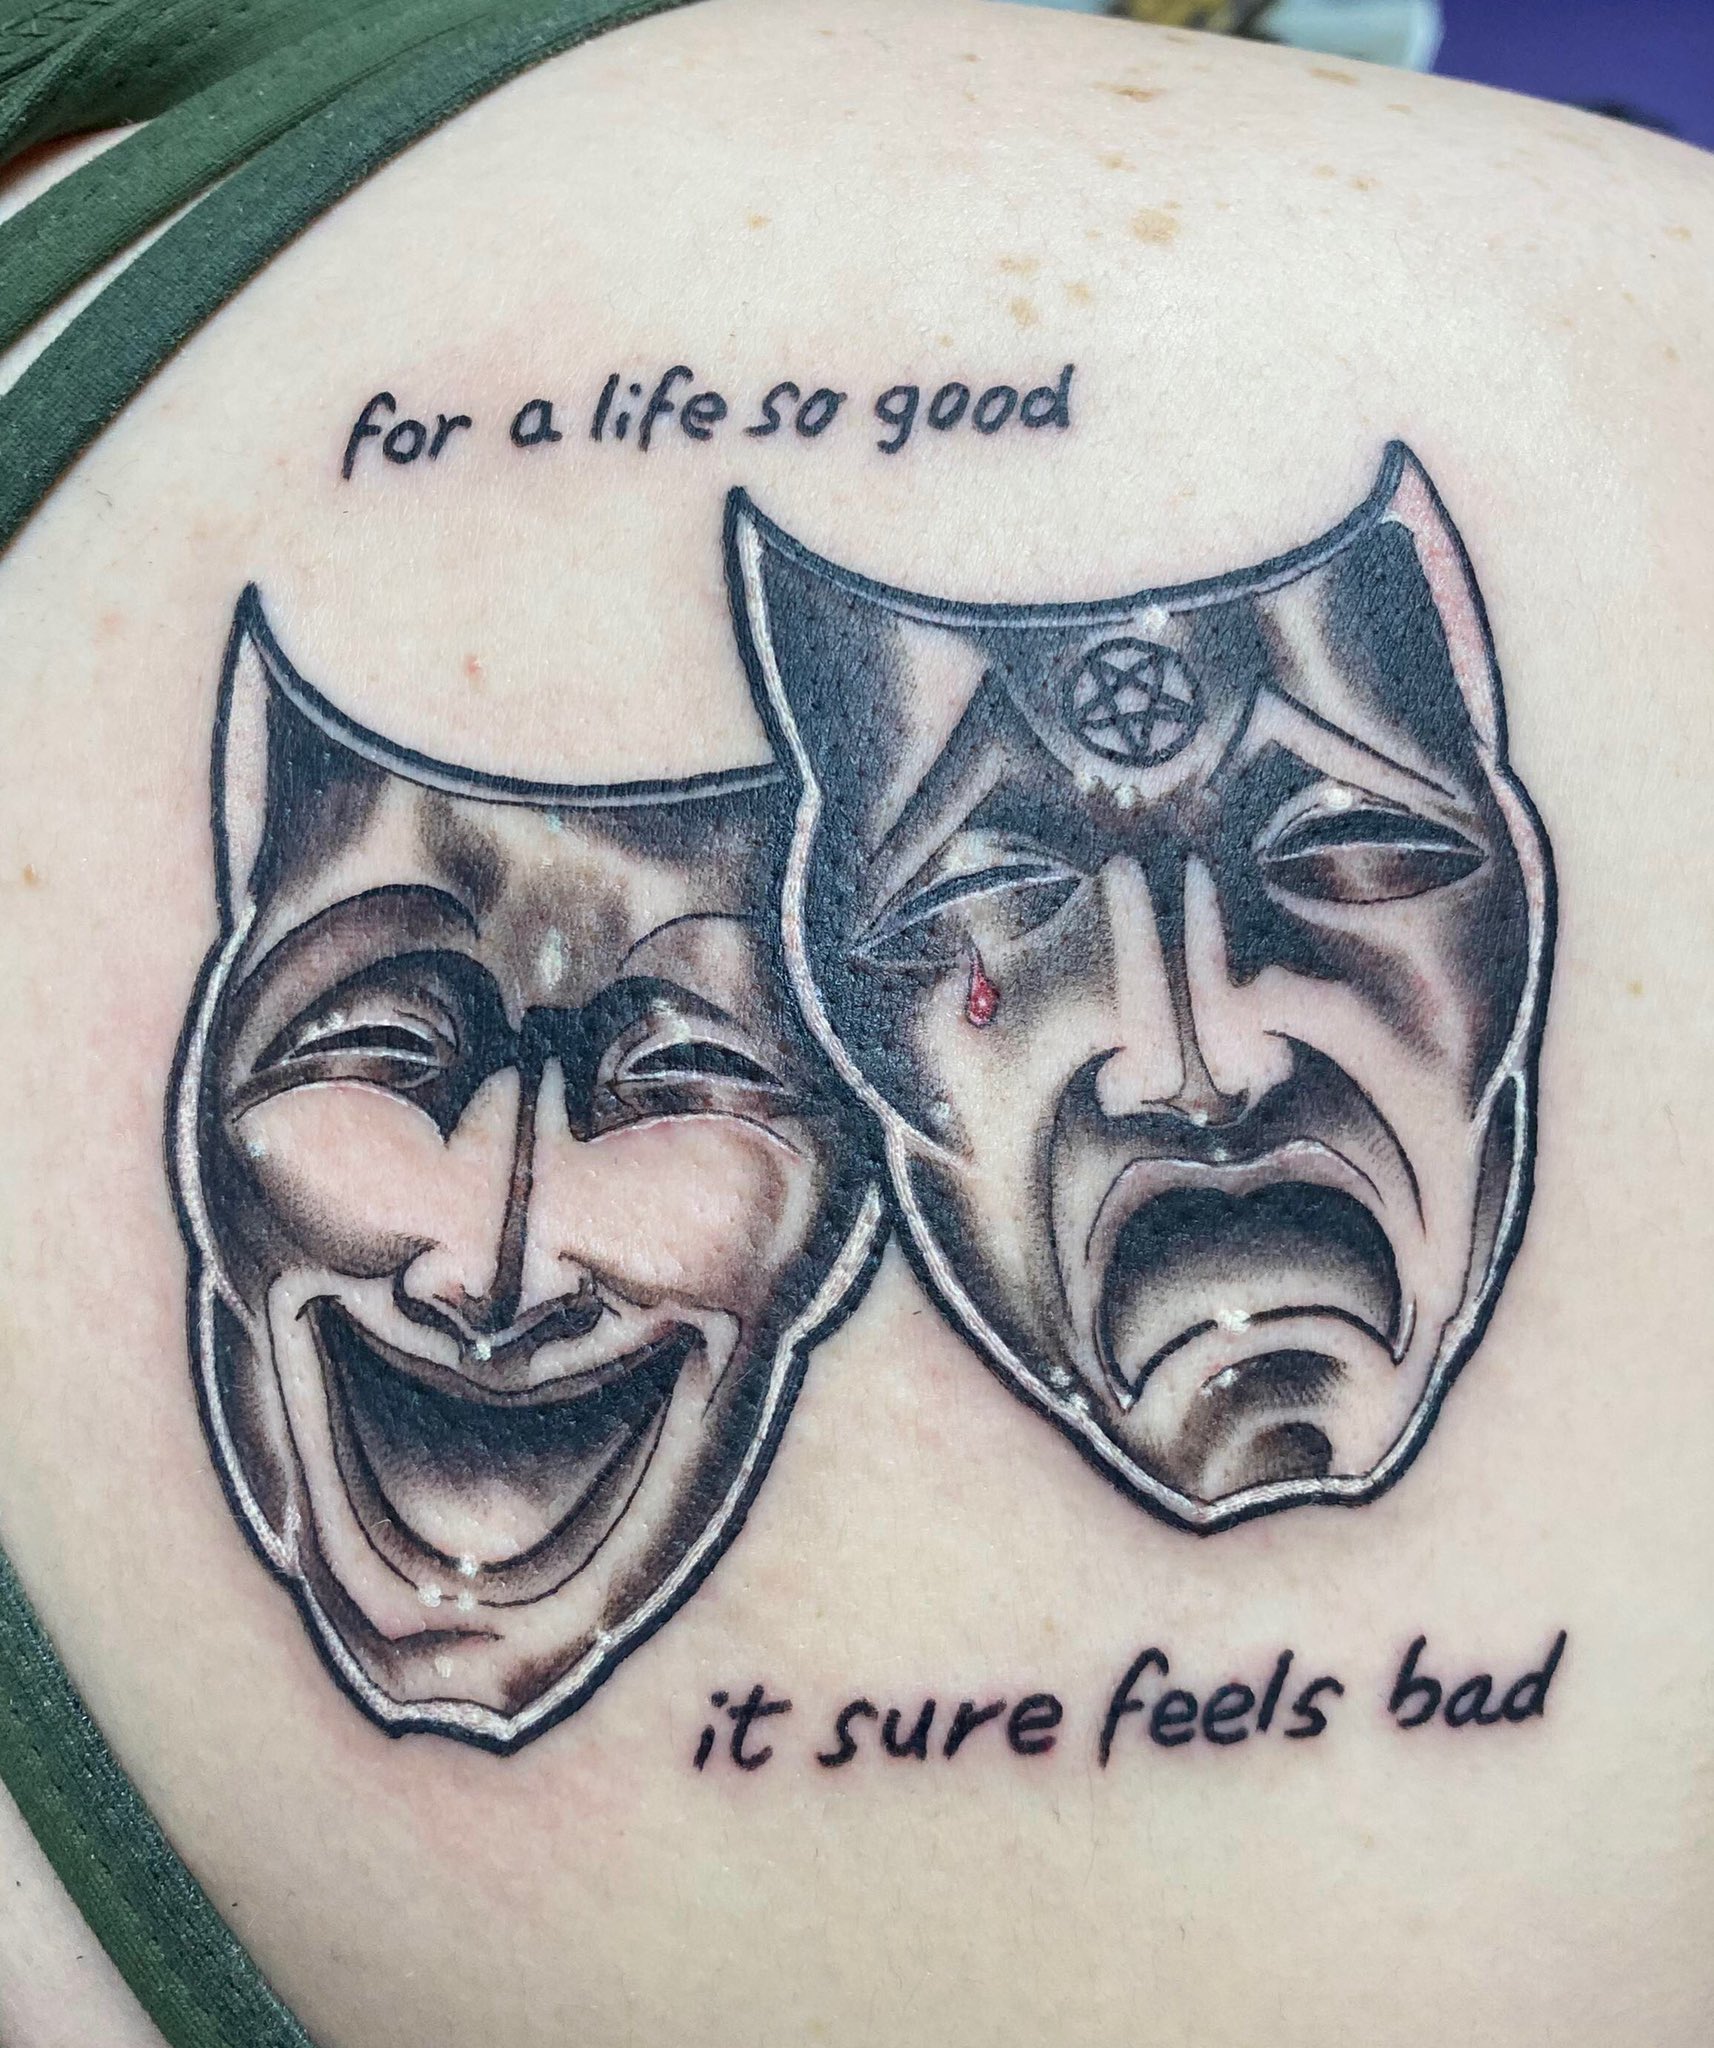 Getting your first tattoo Heres advice from those whove survived the pain